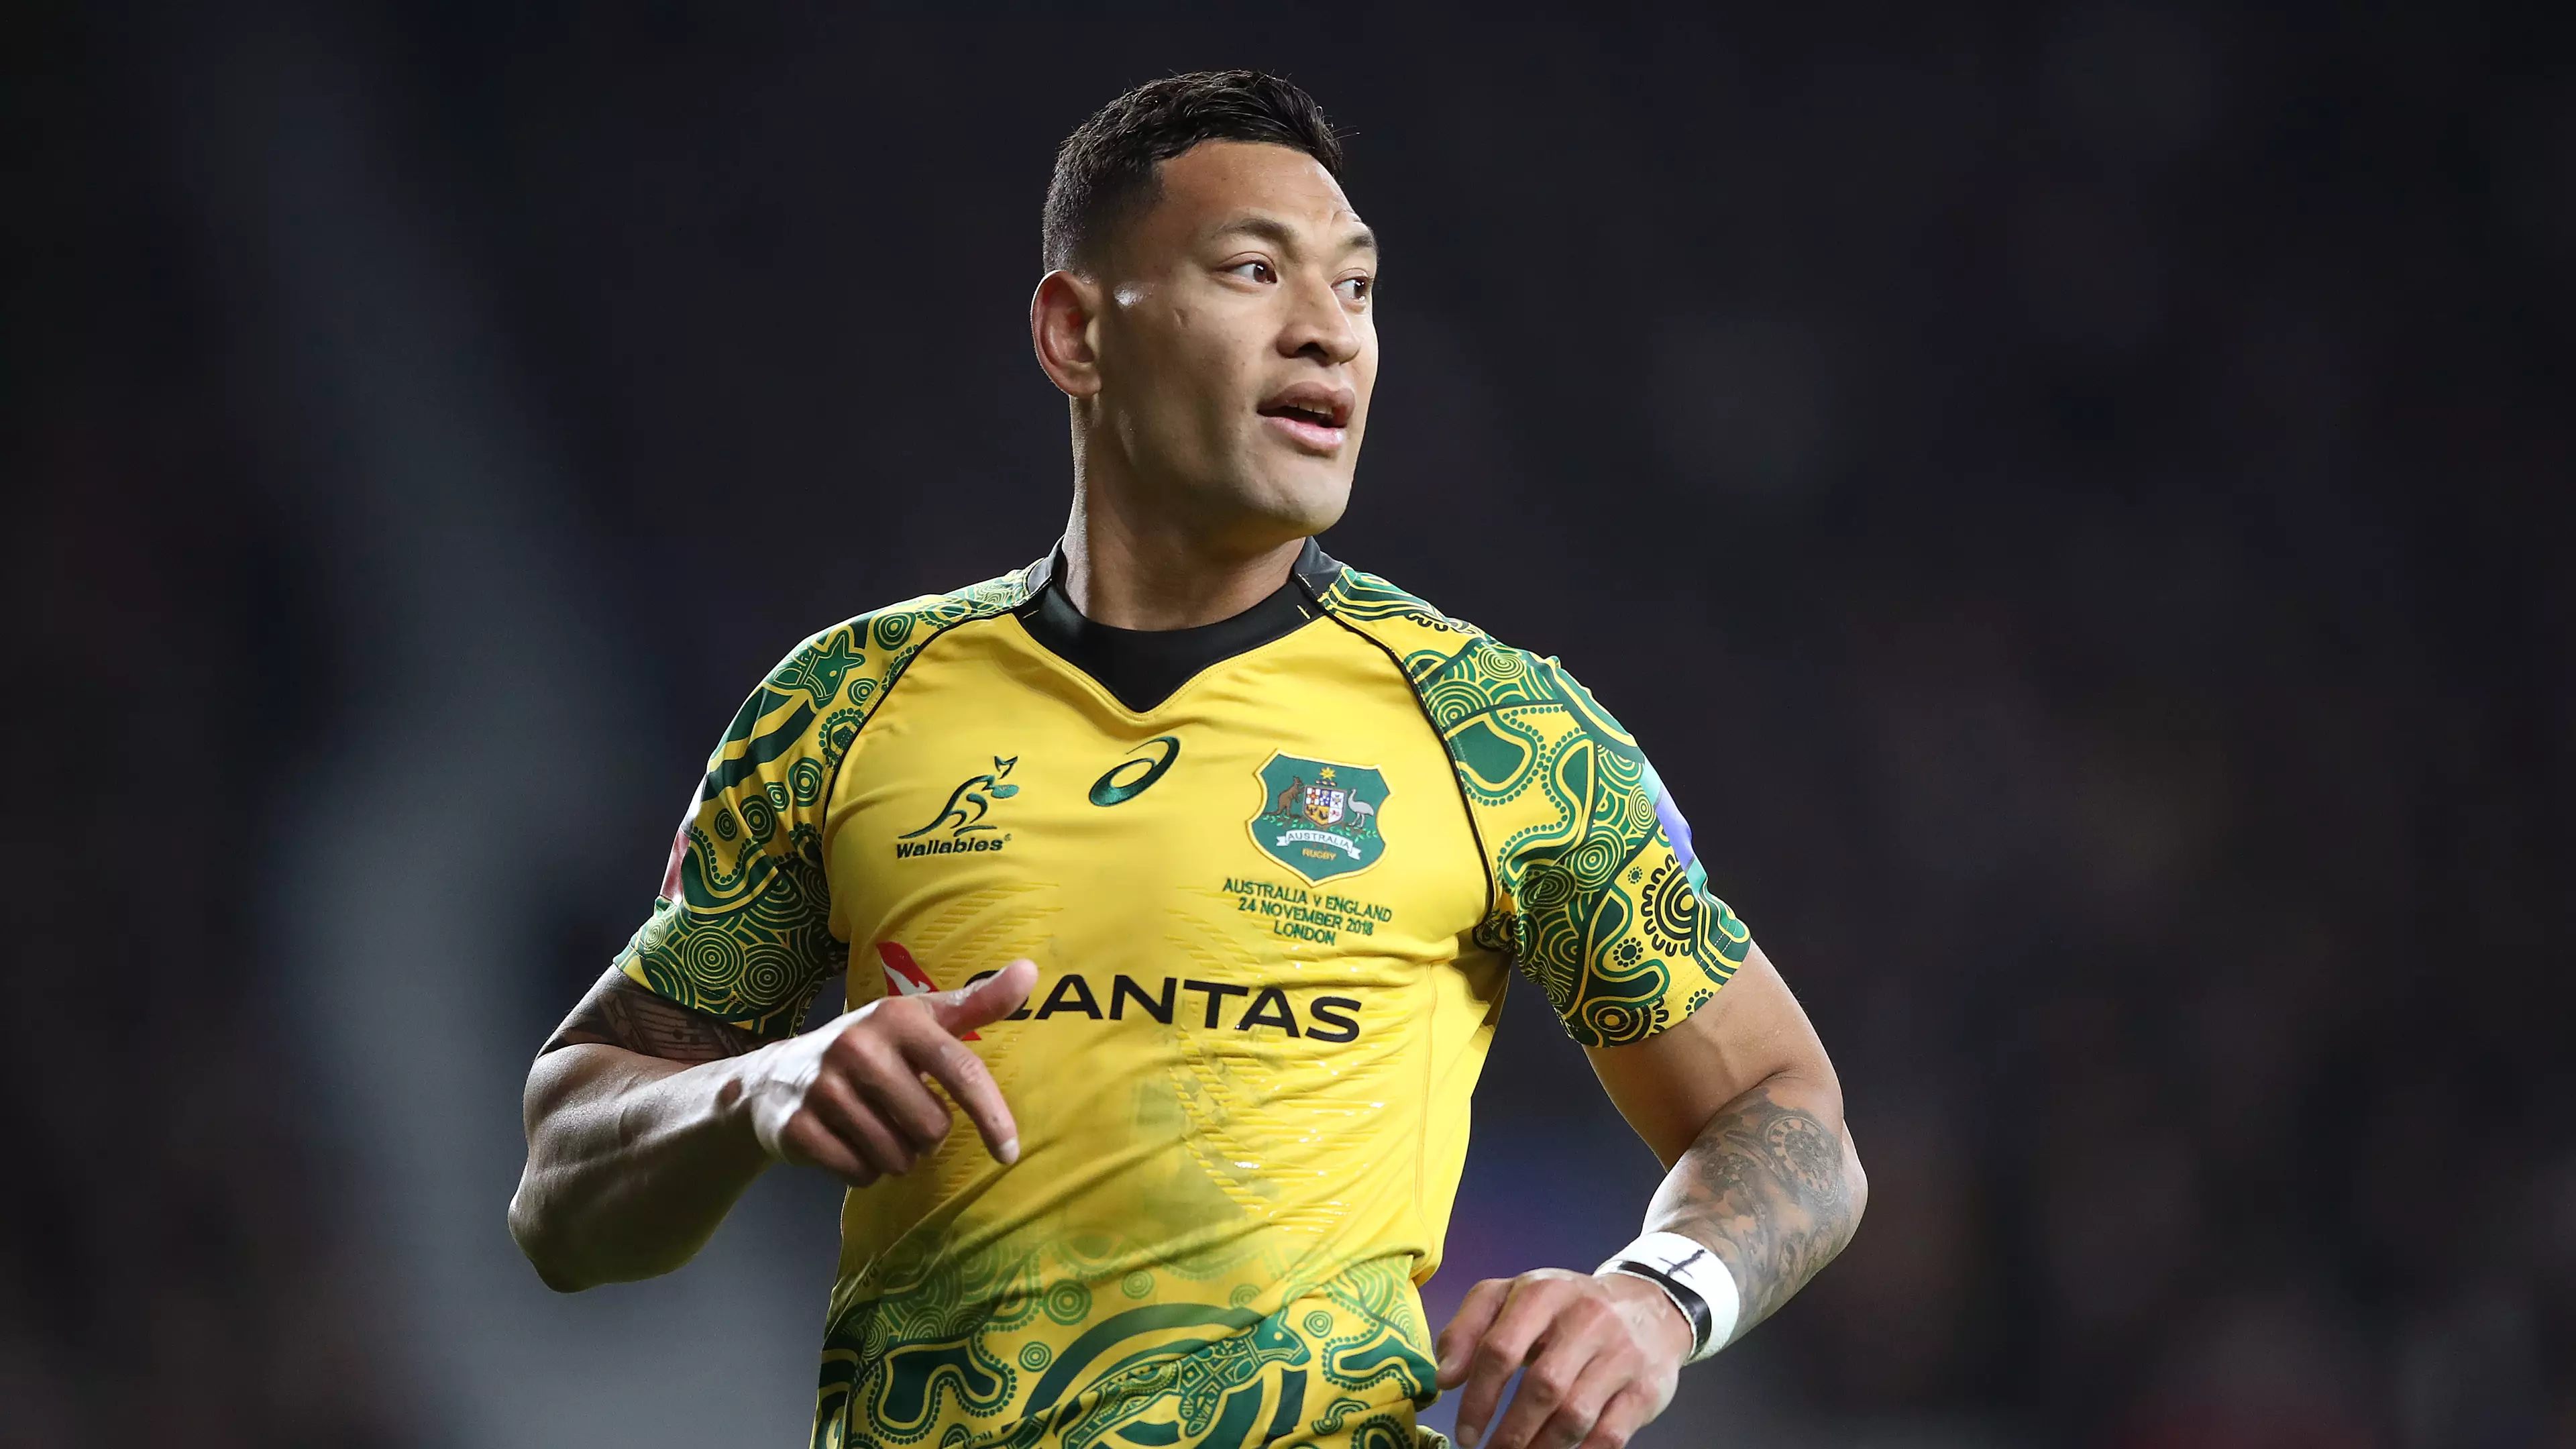 Wallabies Players Are Threatening To Boycott The Team If Israel Folau Is Sacked